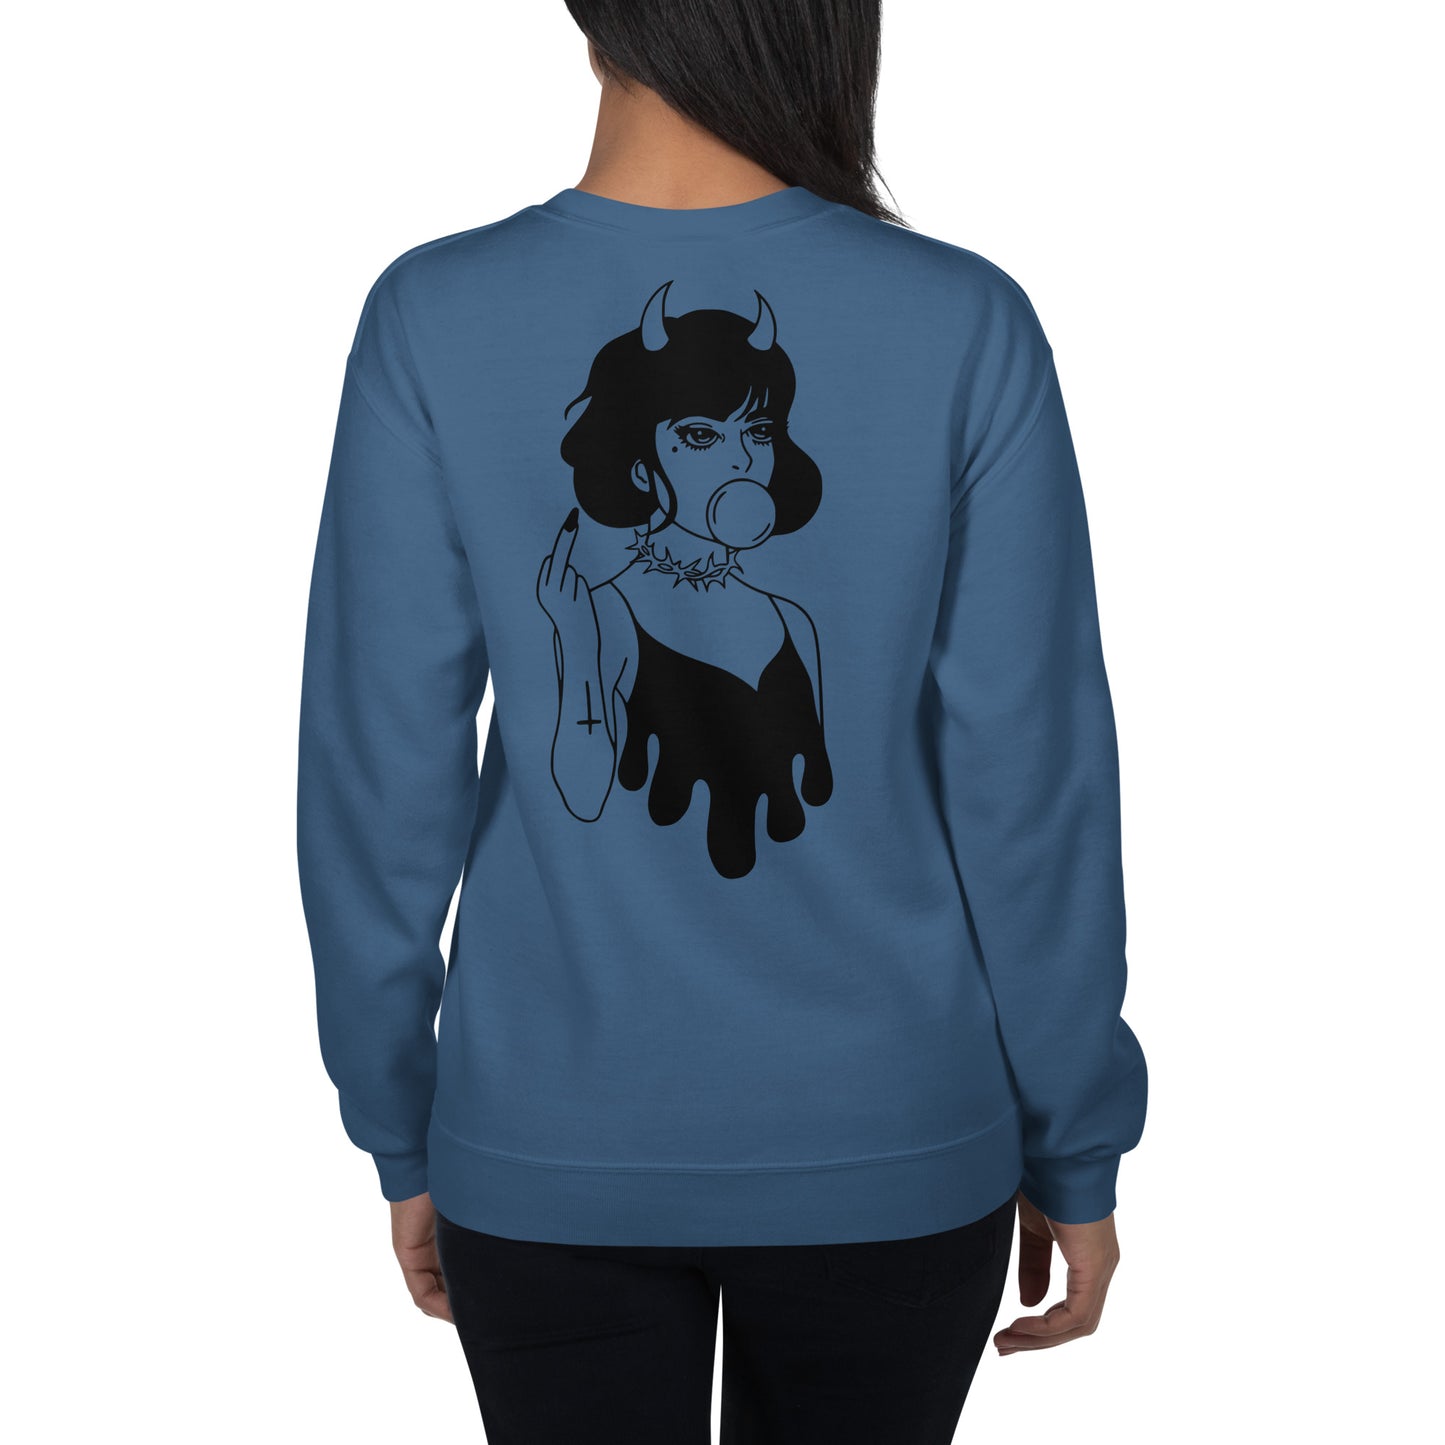 Middle Finger Sweatshirt / Goth Clothing / DBlue Color